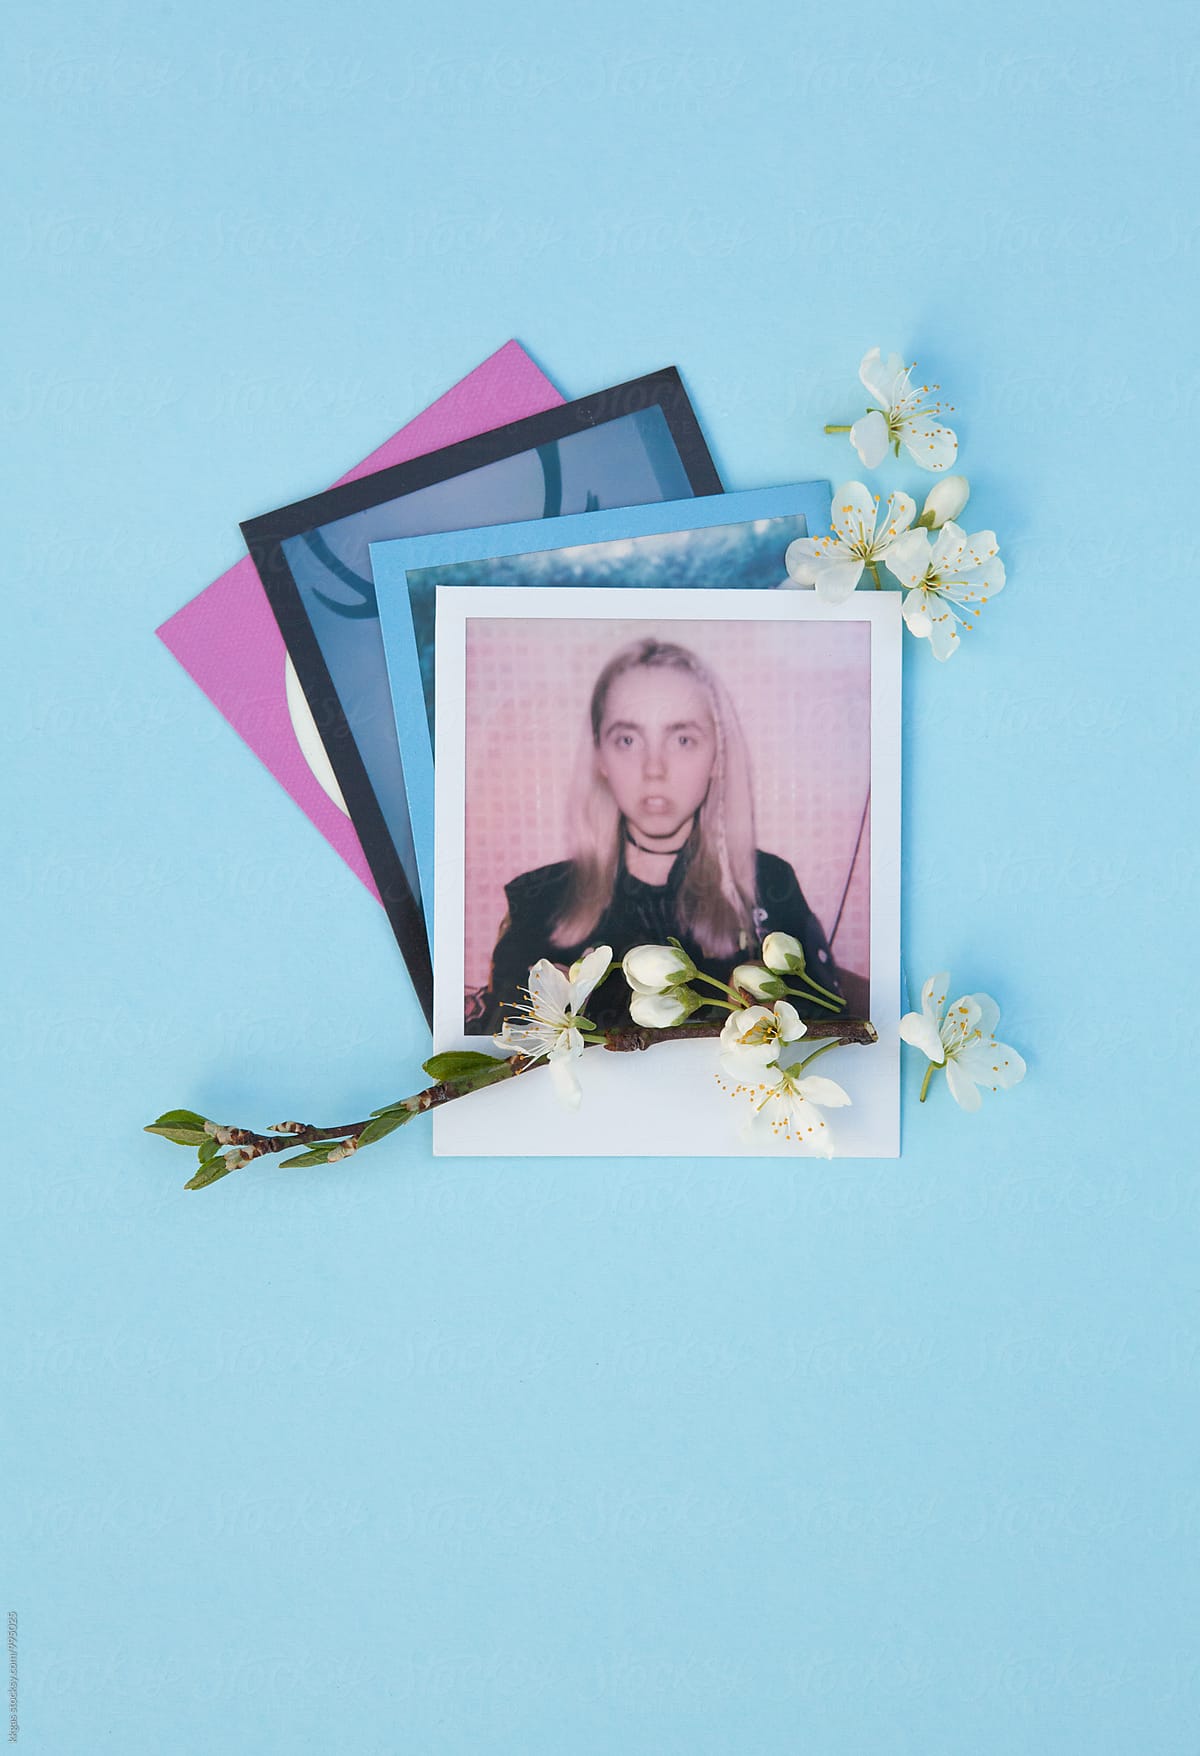 Polaroid picture of a woman with cherry blossoms on a blue background - Polaroid